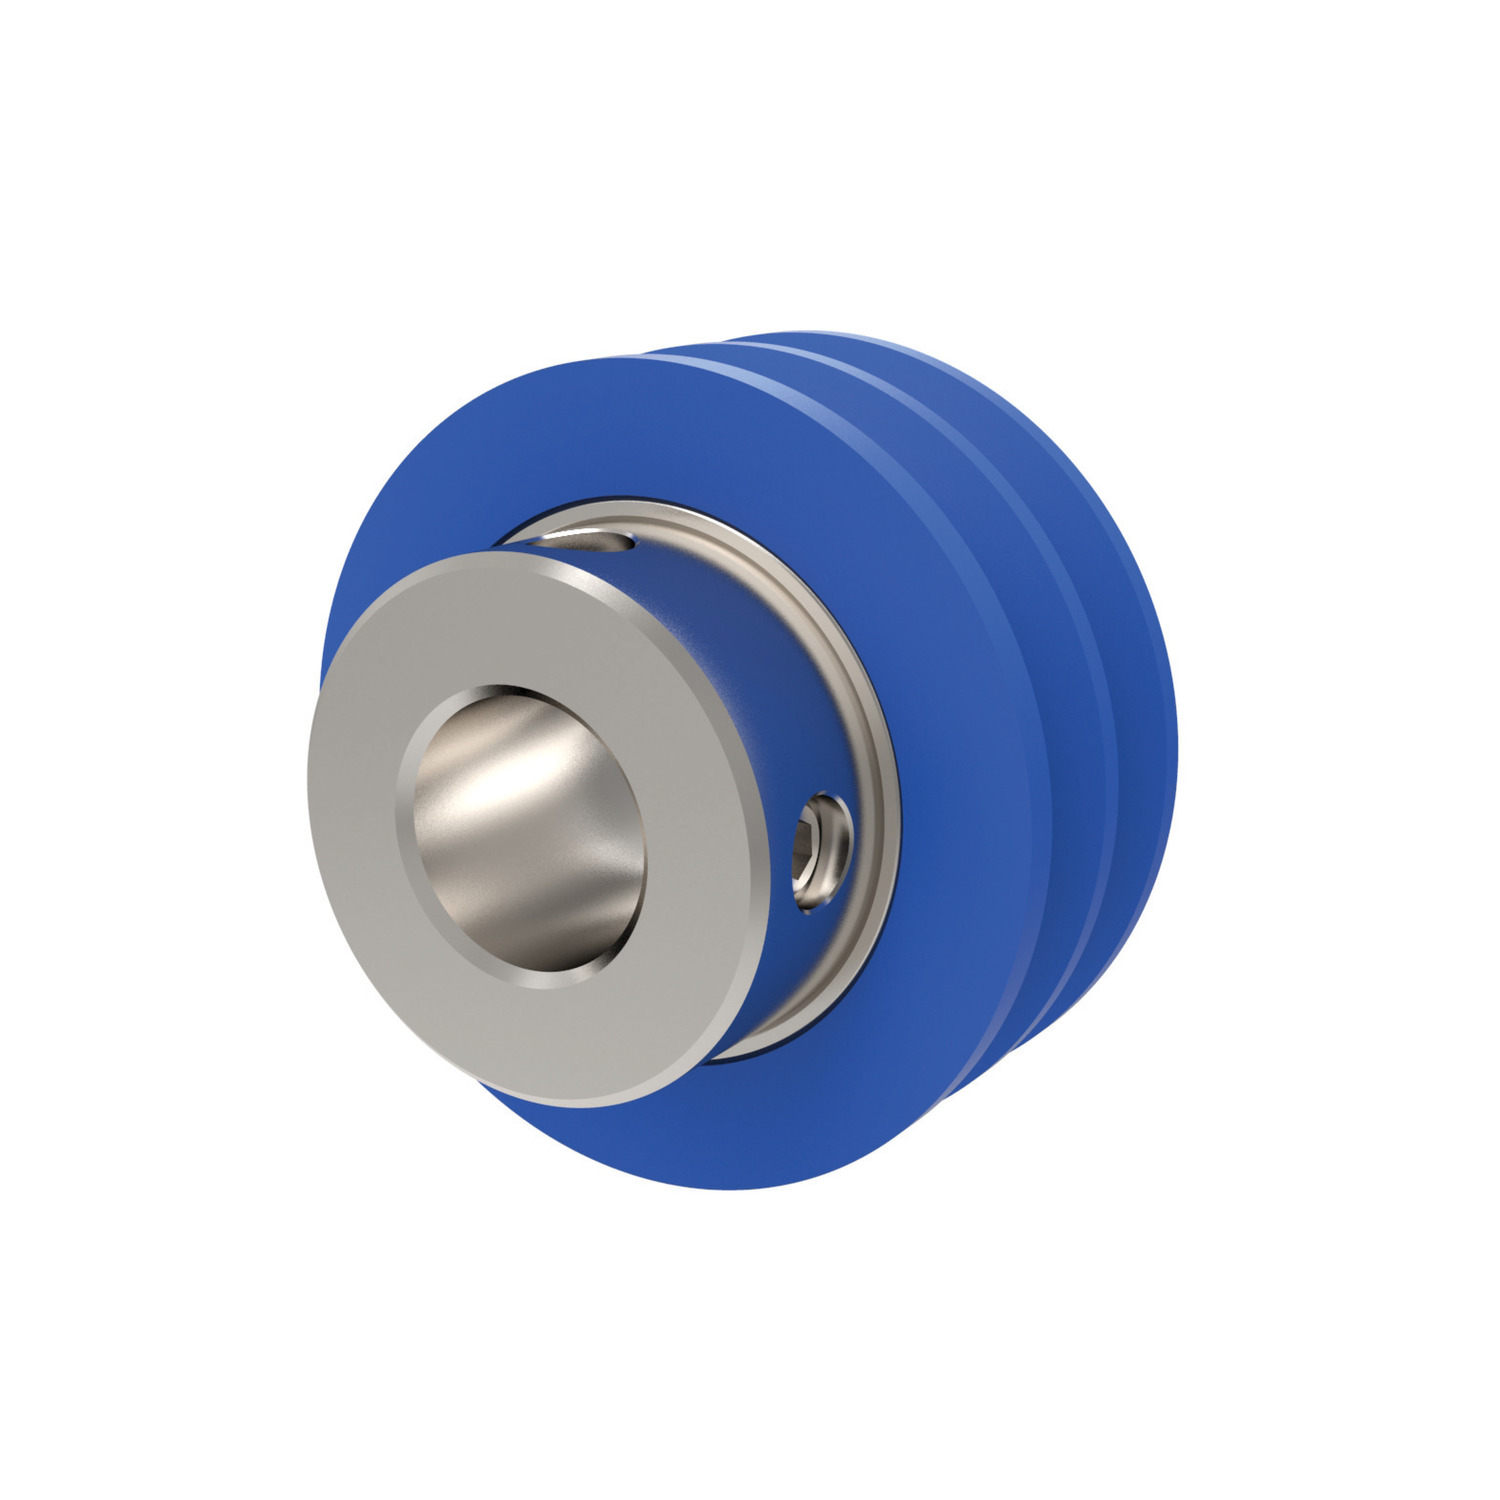 Finned Roller Ranging from 2 to 4 inches in diameter.  Suitable for applications where part protection and appearance are critical. Can be mounted directly to any rotating state shaft.